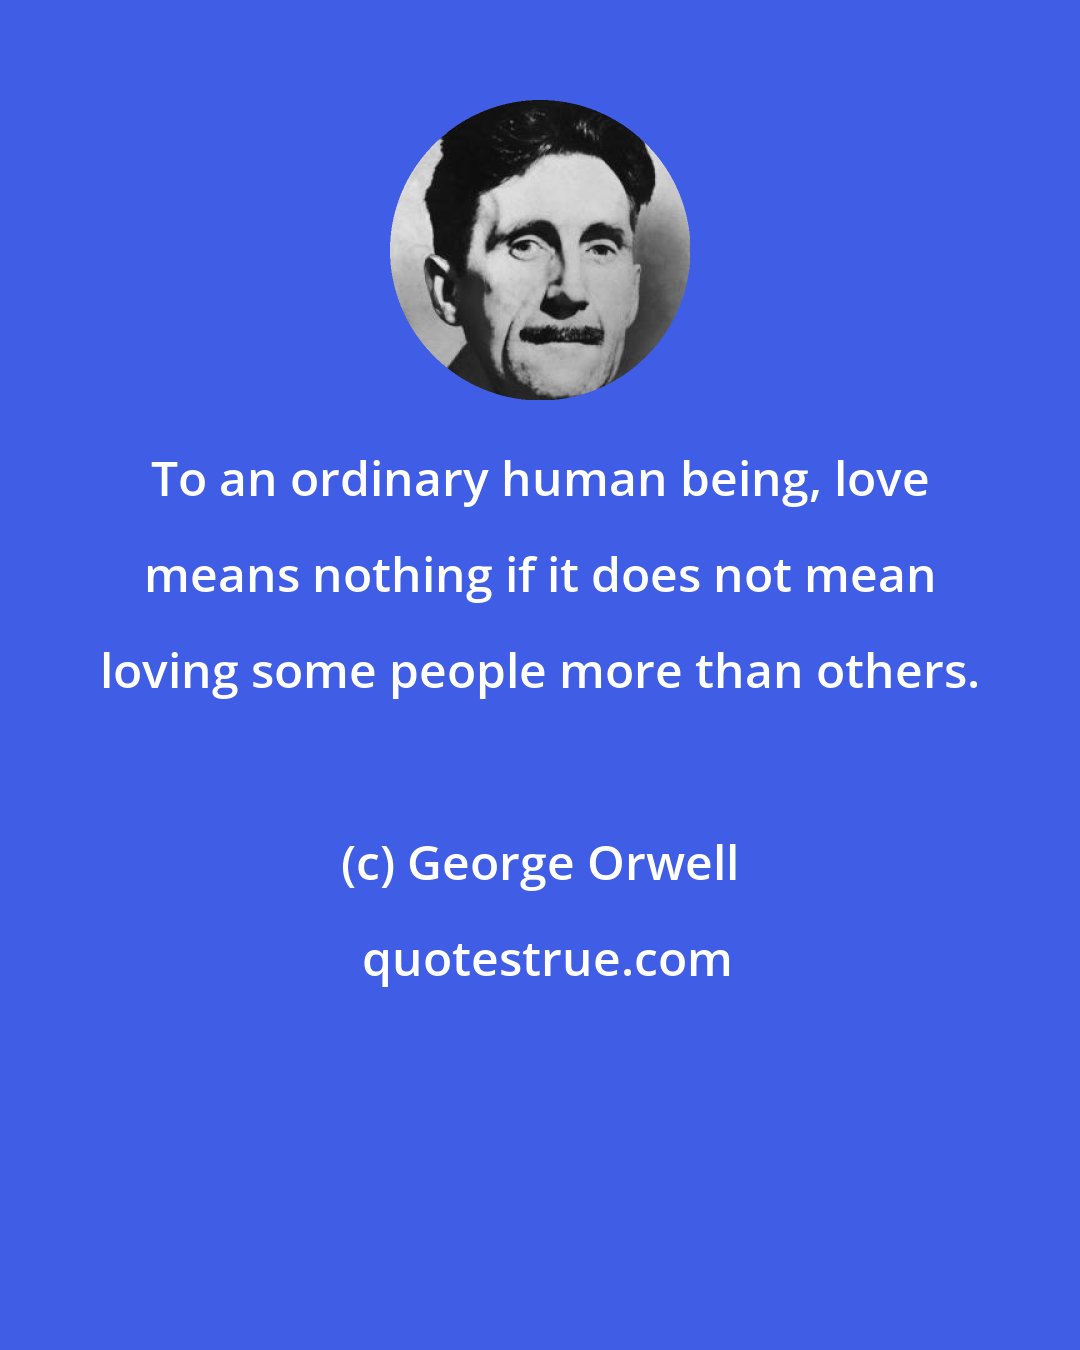 George Orwell: To an ordinary human being, love means nothing if it does not mean loving some people more than others.